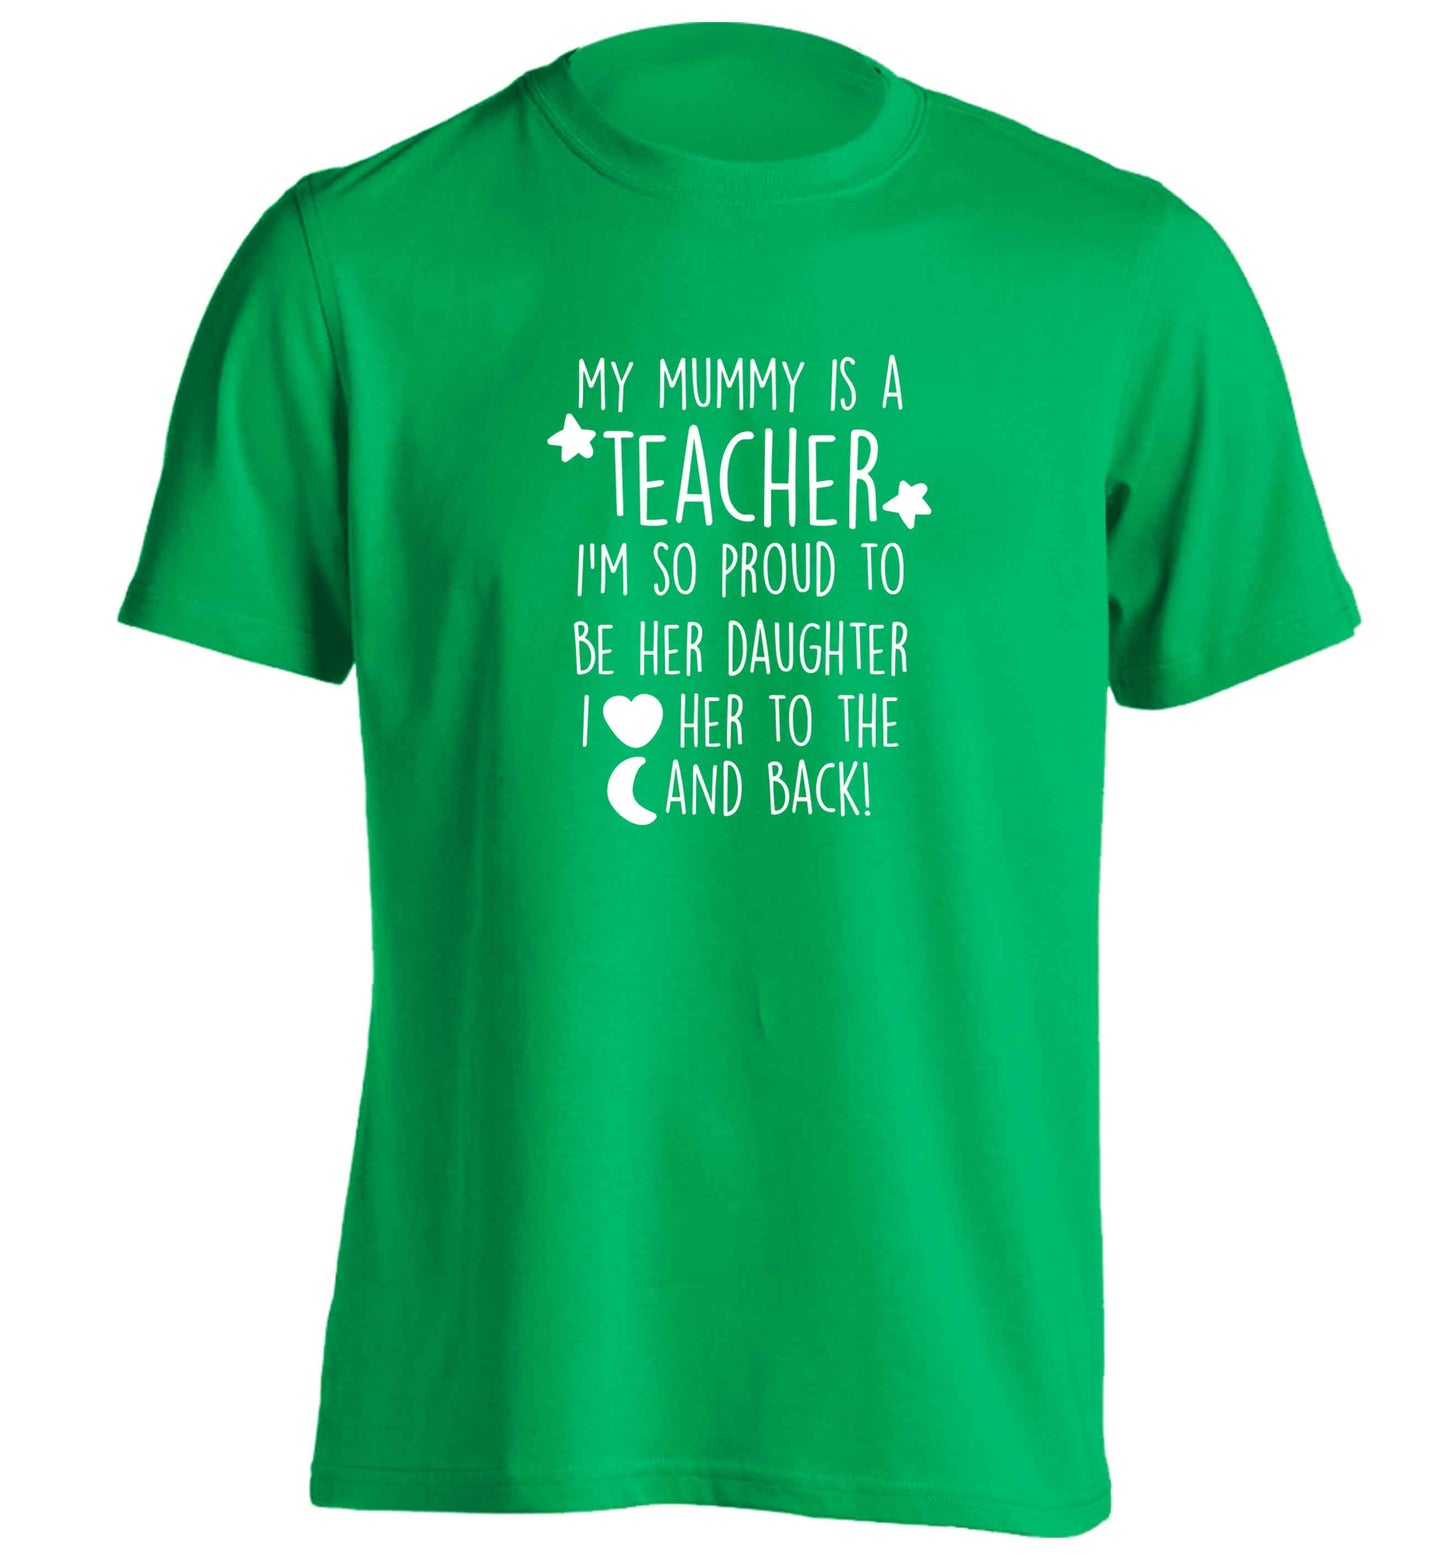 My mummy is a teacher I'm so proud to be her daughter I love her to the moon and back adults unisex green Tshirt 2XL